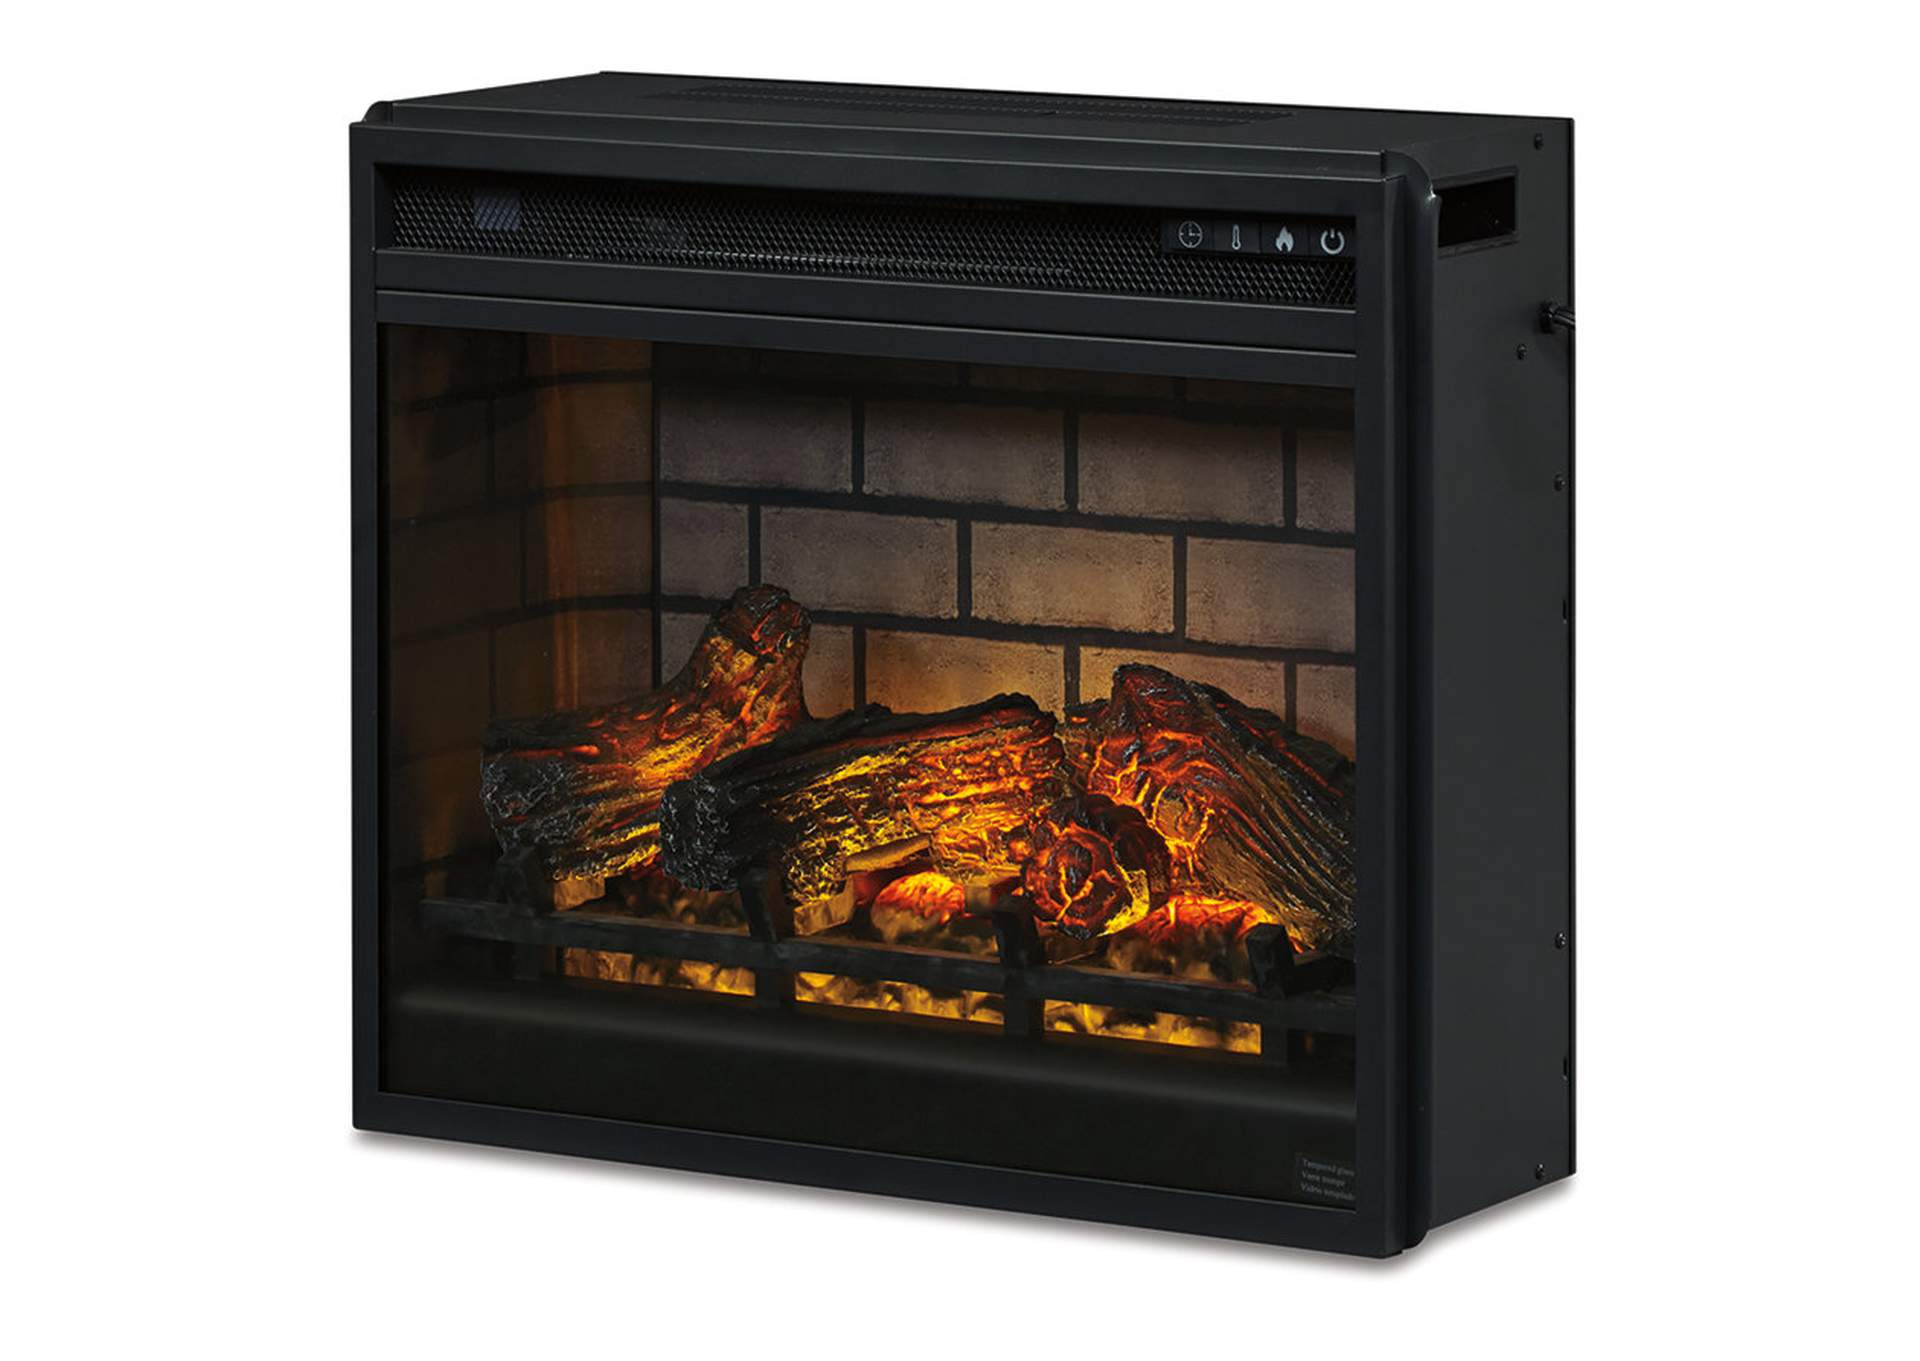 Entertainment Accessories Electric Infrared Fireplace Insert,Signature Design By Ashley